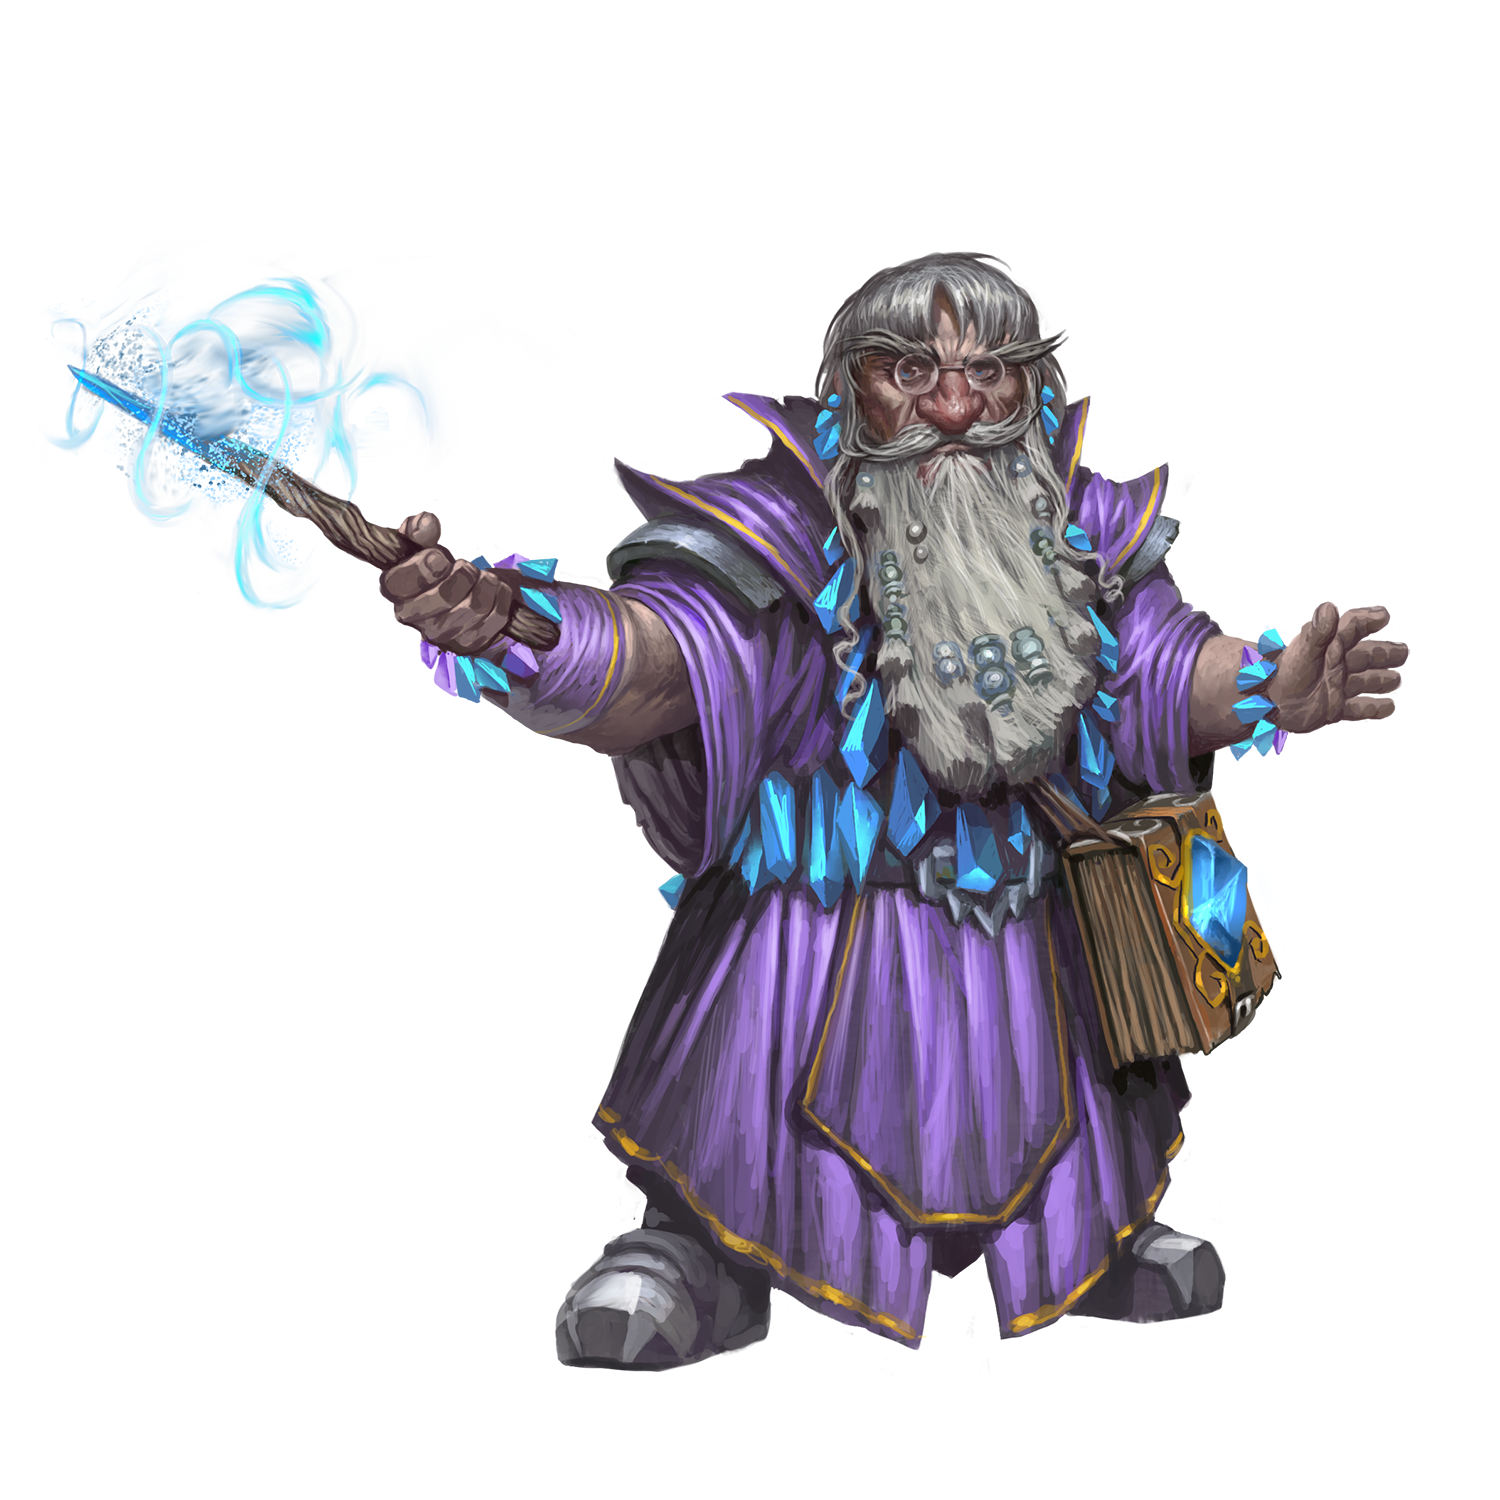 a male dwarf with white hair, blunt bangs, long sideburns, and a well-groomed white beard. He has round gold spectacles and crystal jewelry hanging from his ears, around his neck, and on both wrists. He wears purple robes, has a large, leather-bound spellbook with a large crystal on the cover at his waist, and even more crystals hang from his belt. In one hand, he has a wand with a crystal tip that he’s using to cast some powerful cold spell. Color palette focuses for this piece are purples, whites, gold.